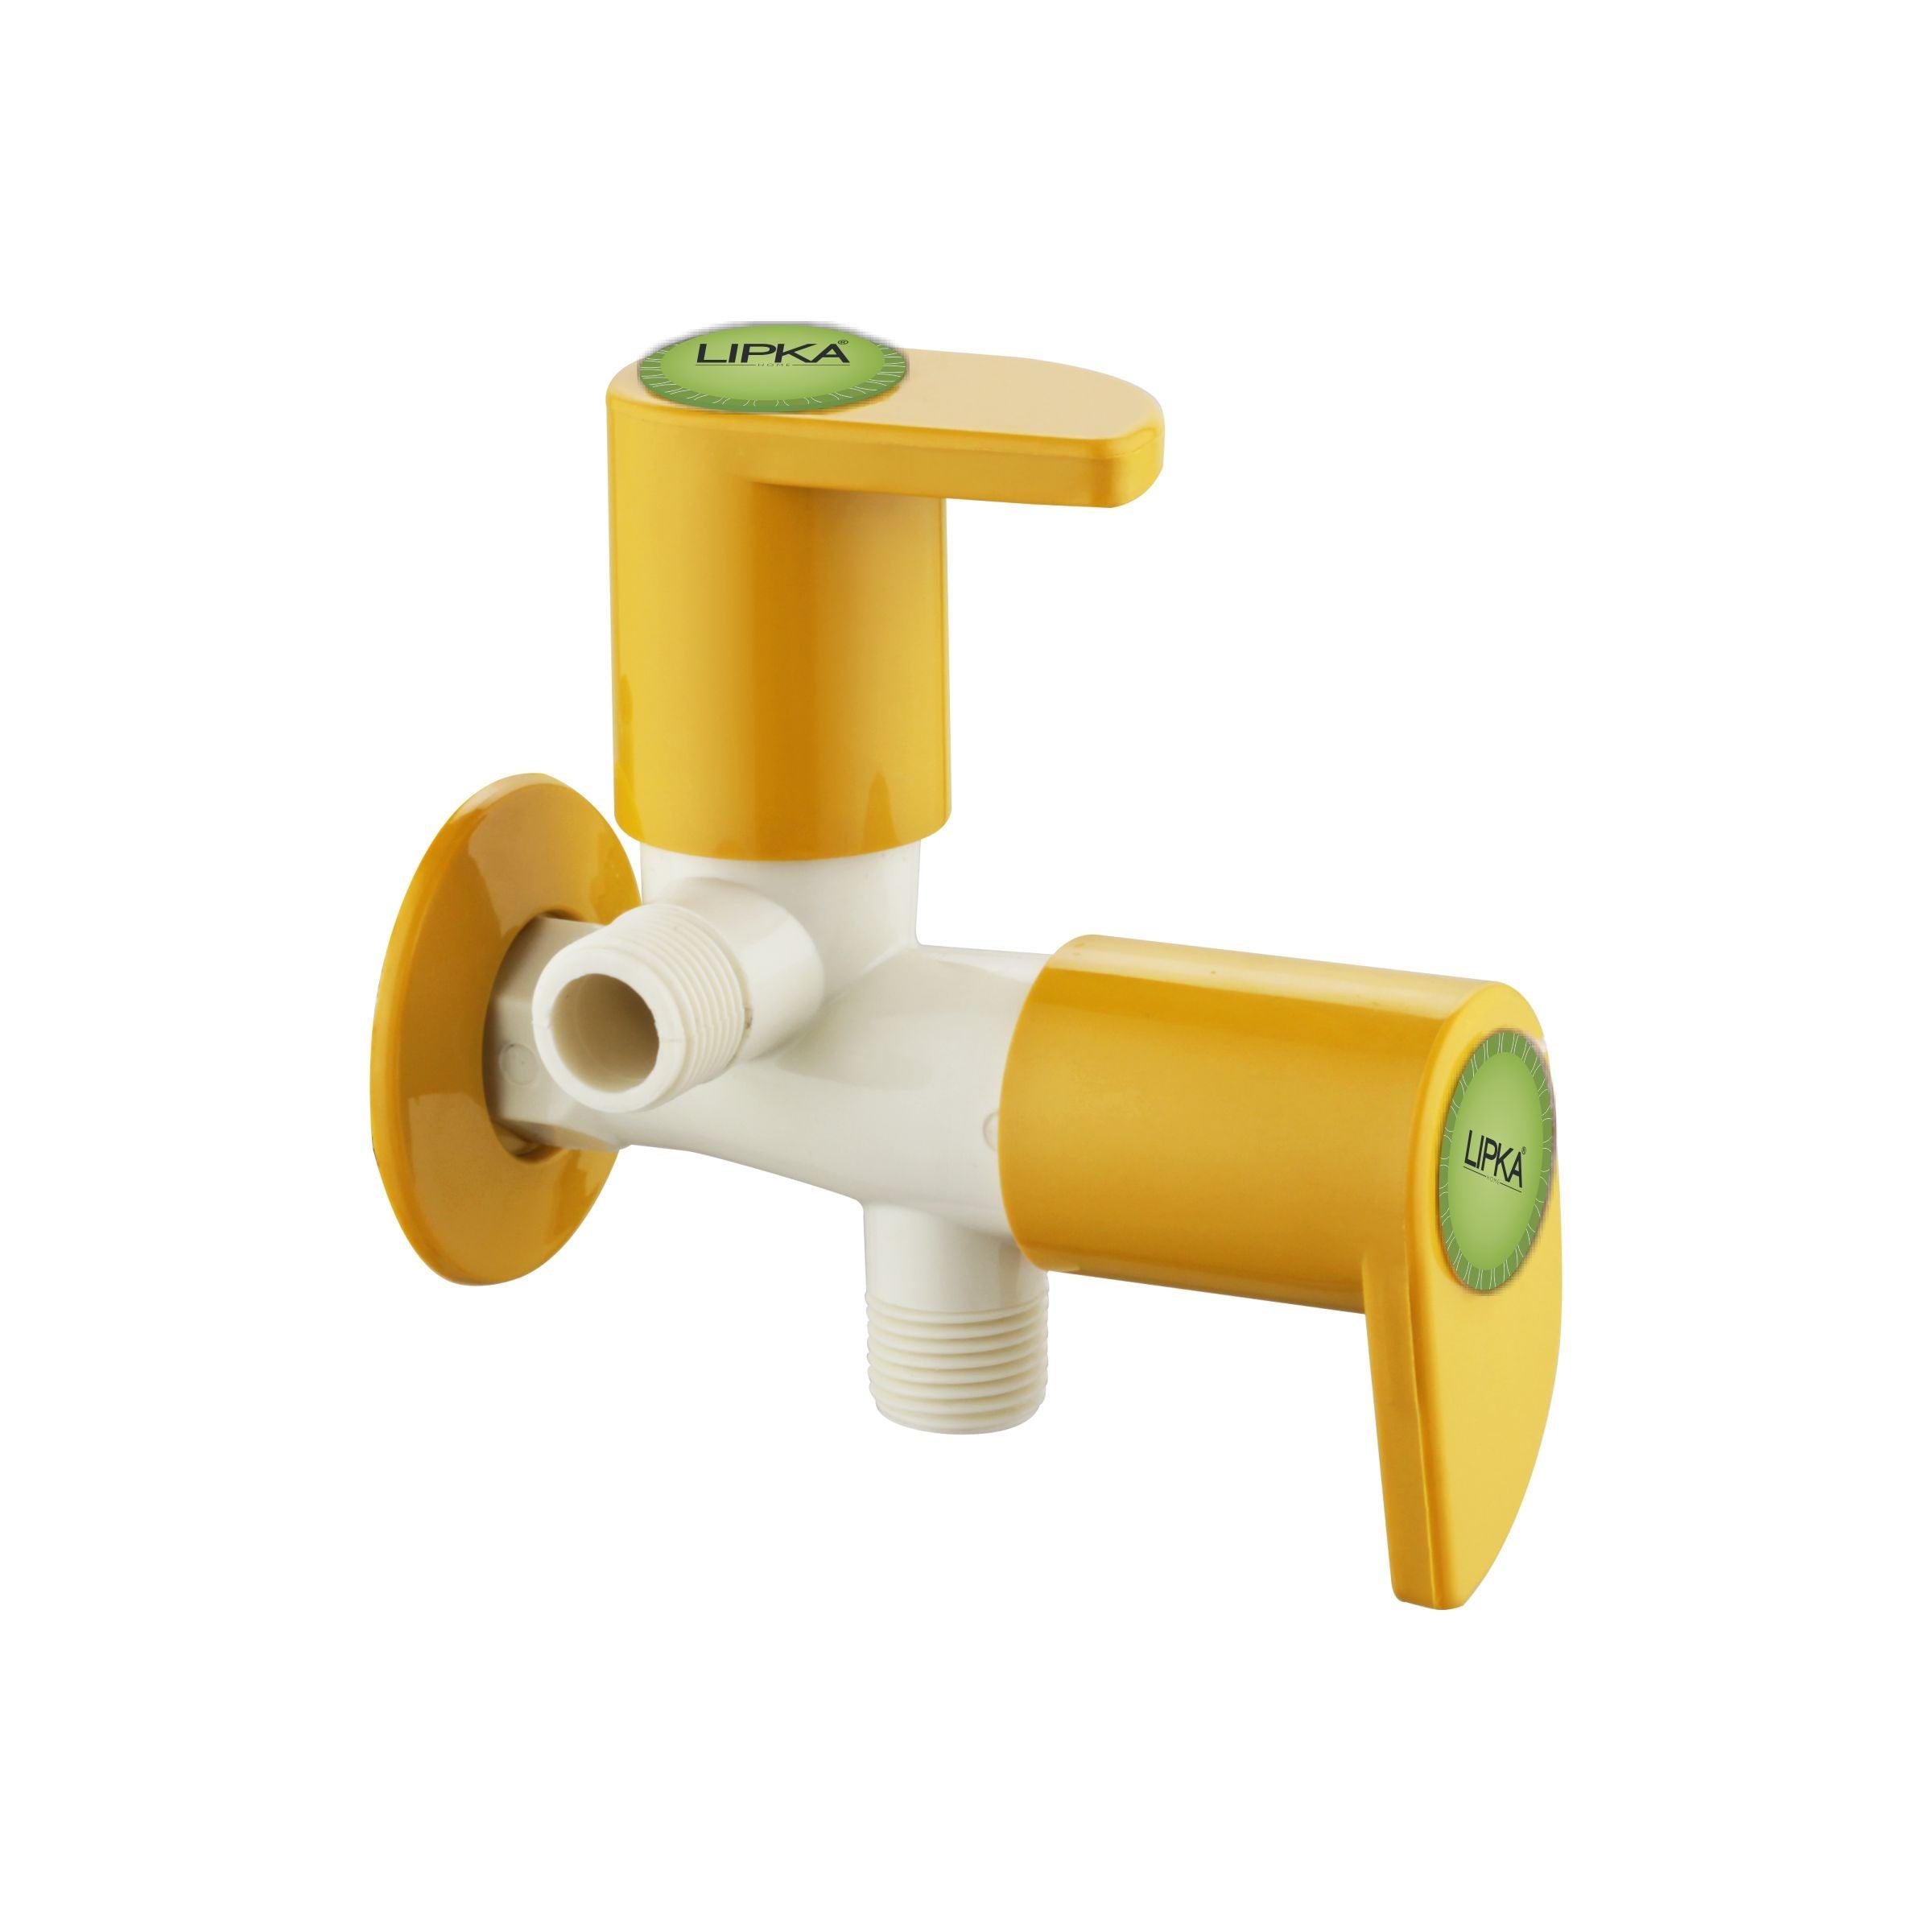 Pecker Two Way Angle Valve PTMT Faucet (Double Handle)